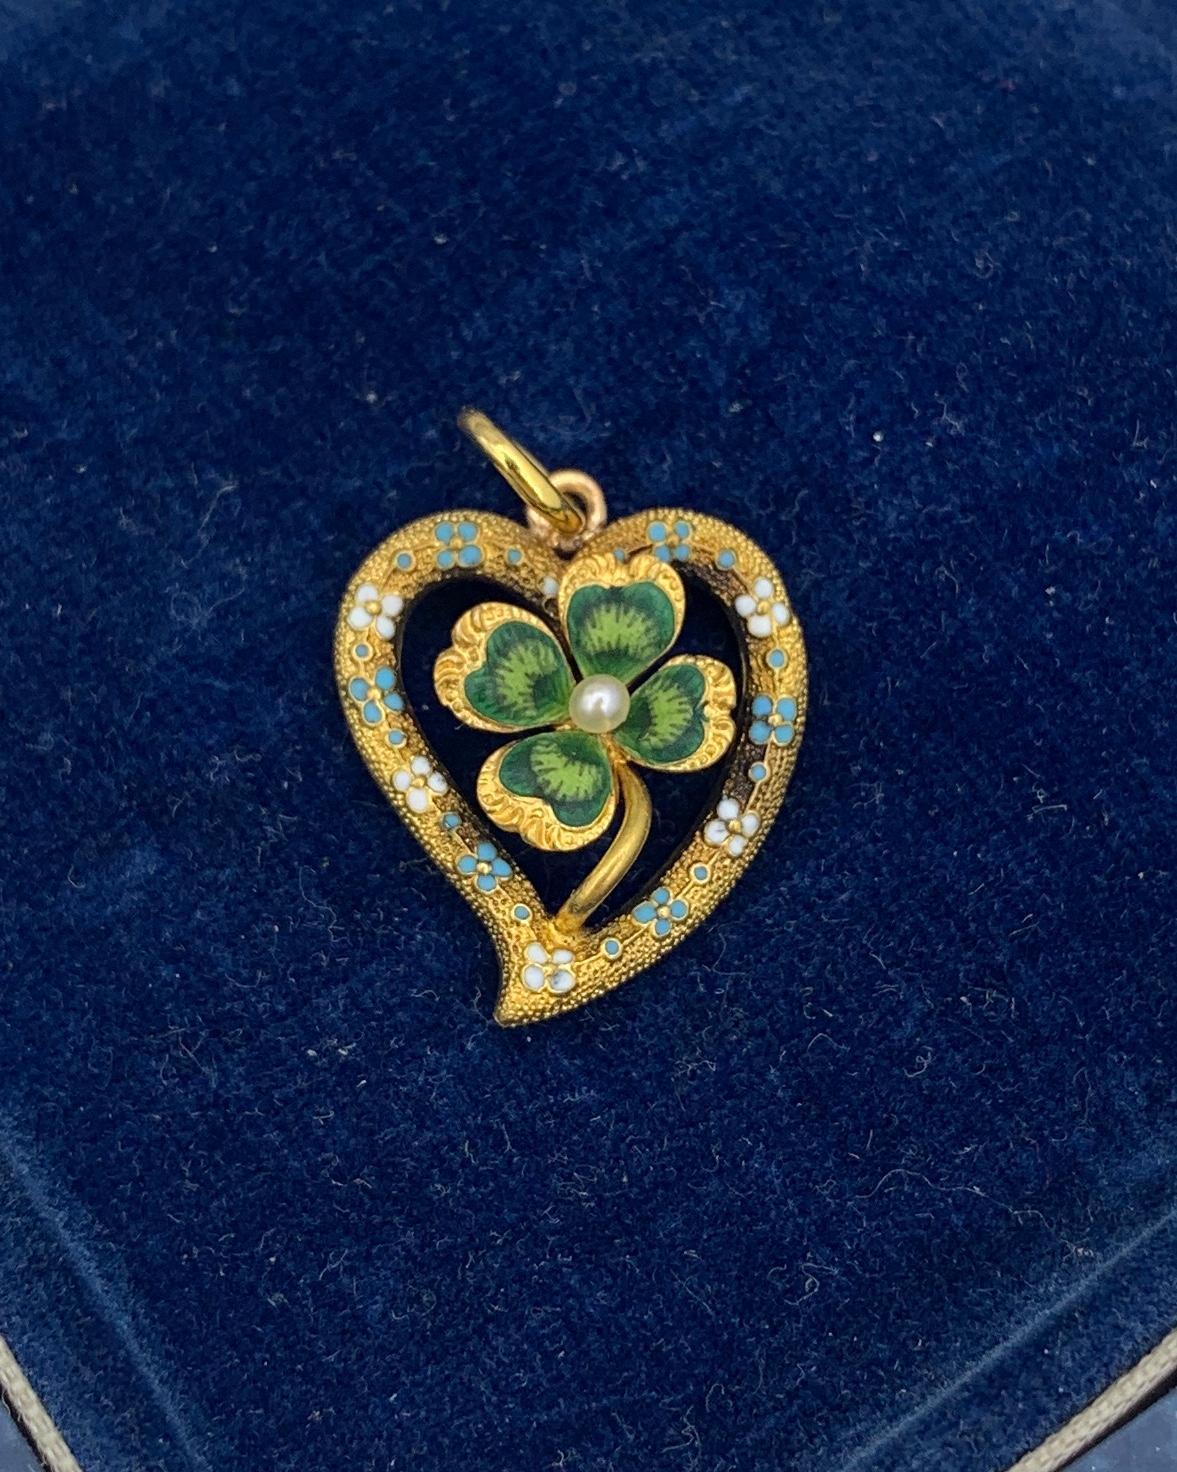 THIS IS A WONDERFUL A VICTORIAN - ART NOUVEAU PENDANT IN THE FORM OF A FLOWER ADORNED HEART WITH A LUCKY FOUR LEAF CLOVER IN THE CENTER WITH A CENTRAL PEARL AND THE MOST SPECTACULAR GREEN, ROBIN'S EGG BLUE AND CREAM COLORED DETAILED ENAMEL OF THE